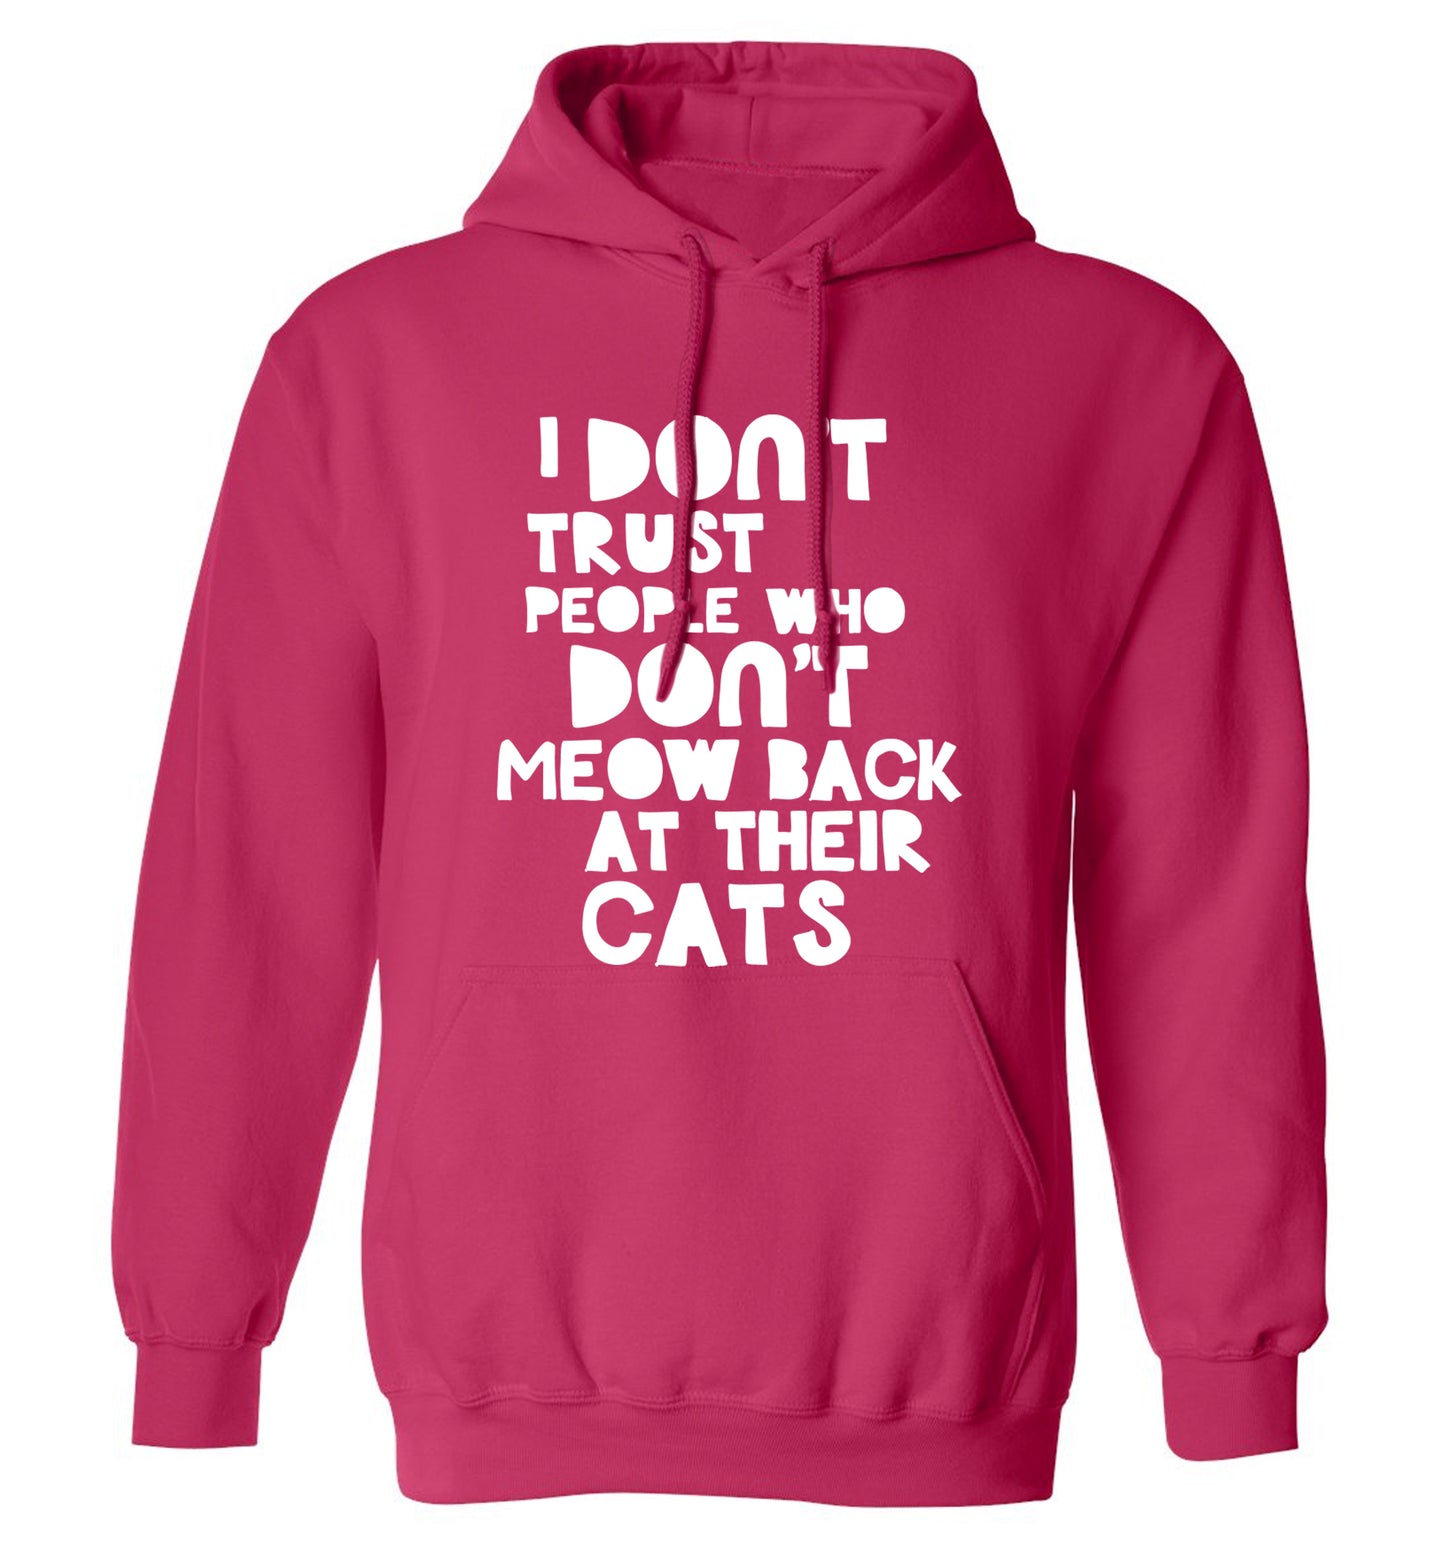 I don't trust people who don't meow back at their cats adults unisex pink hoodie 2XL